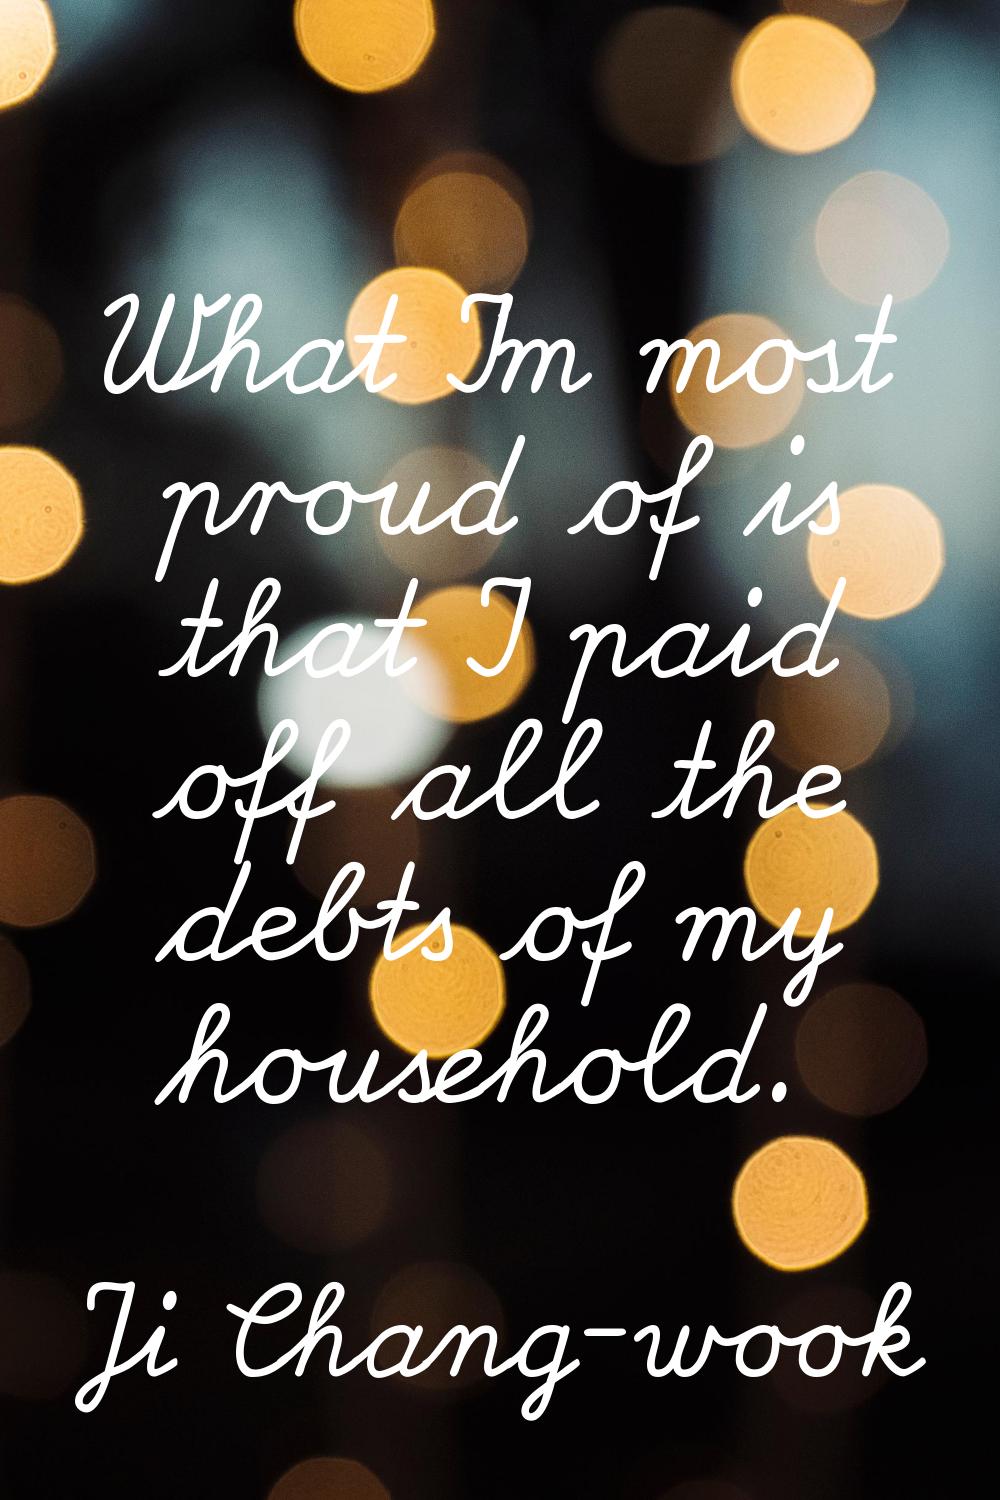 What I'm most proud of is that I paid off all the debts of my household.